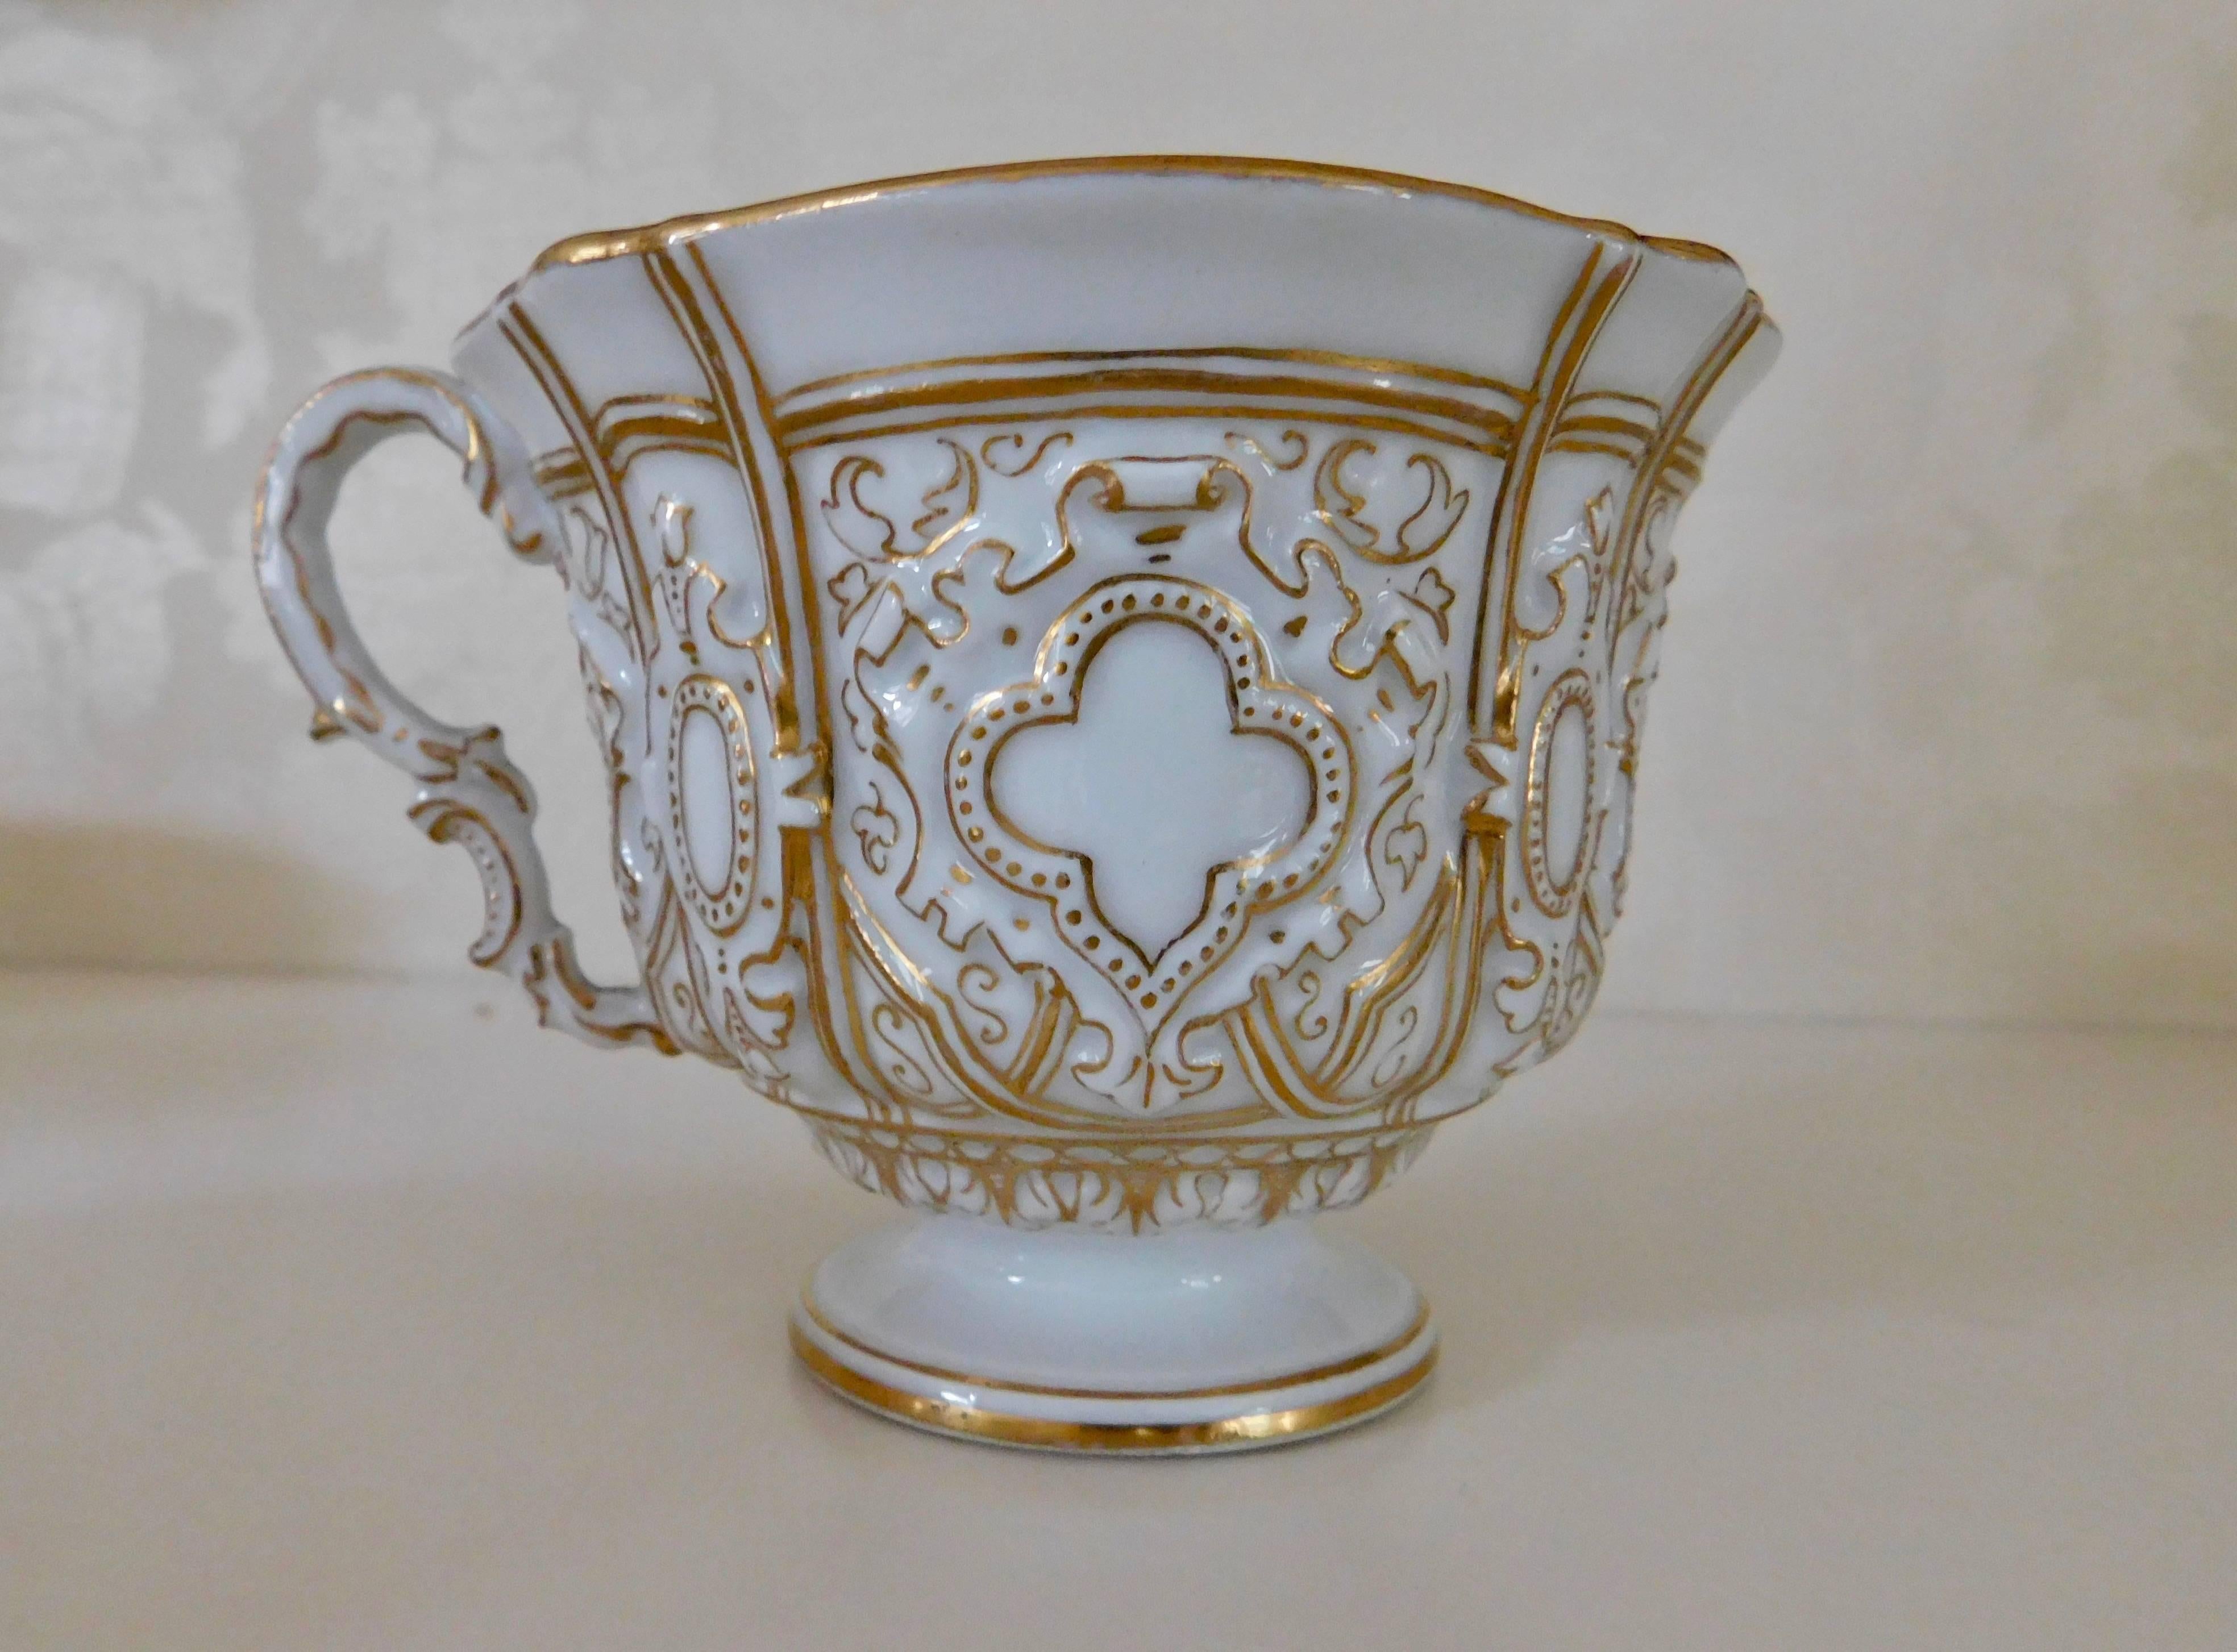 Early 20th century Meissen porcelain heavy gold trim embossed cup and saucer.
White porcelain cup and saucer beautifully detailed in gold.
Measurements in inches:
cup 4 D x 3.13 H
saucer 6 D x 1 H.
   